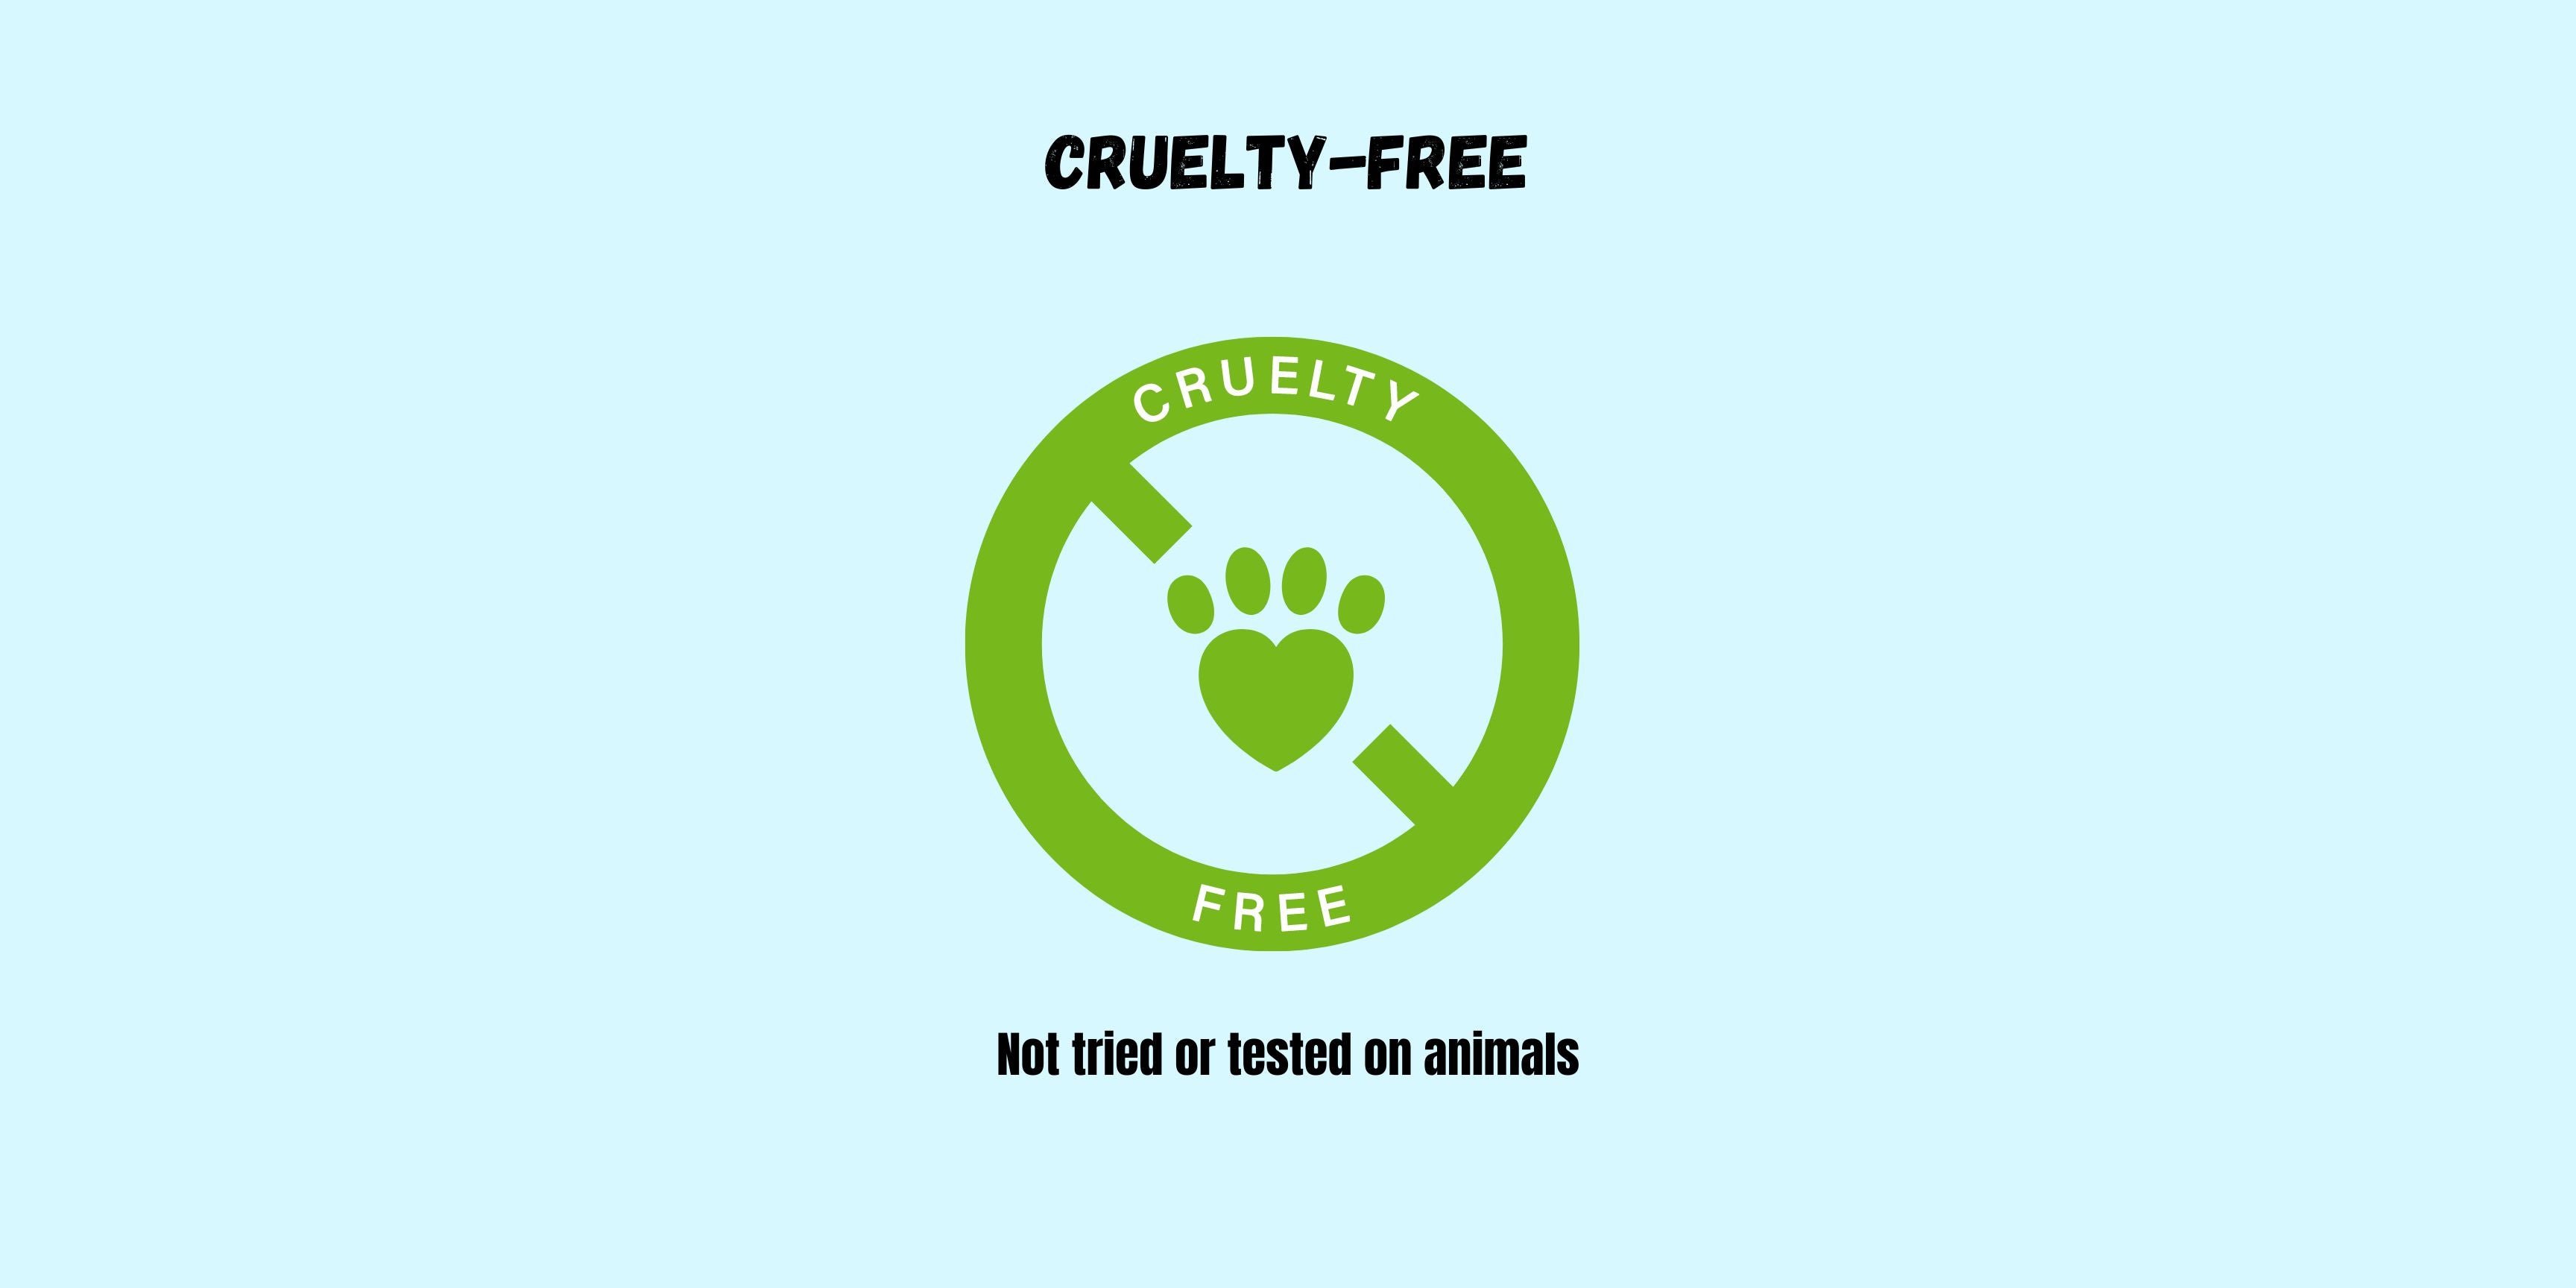 Cruelty-free, Not tried or tested on animals